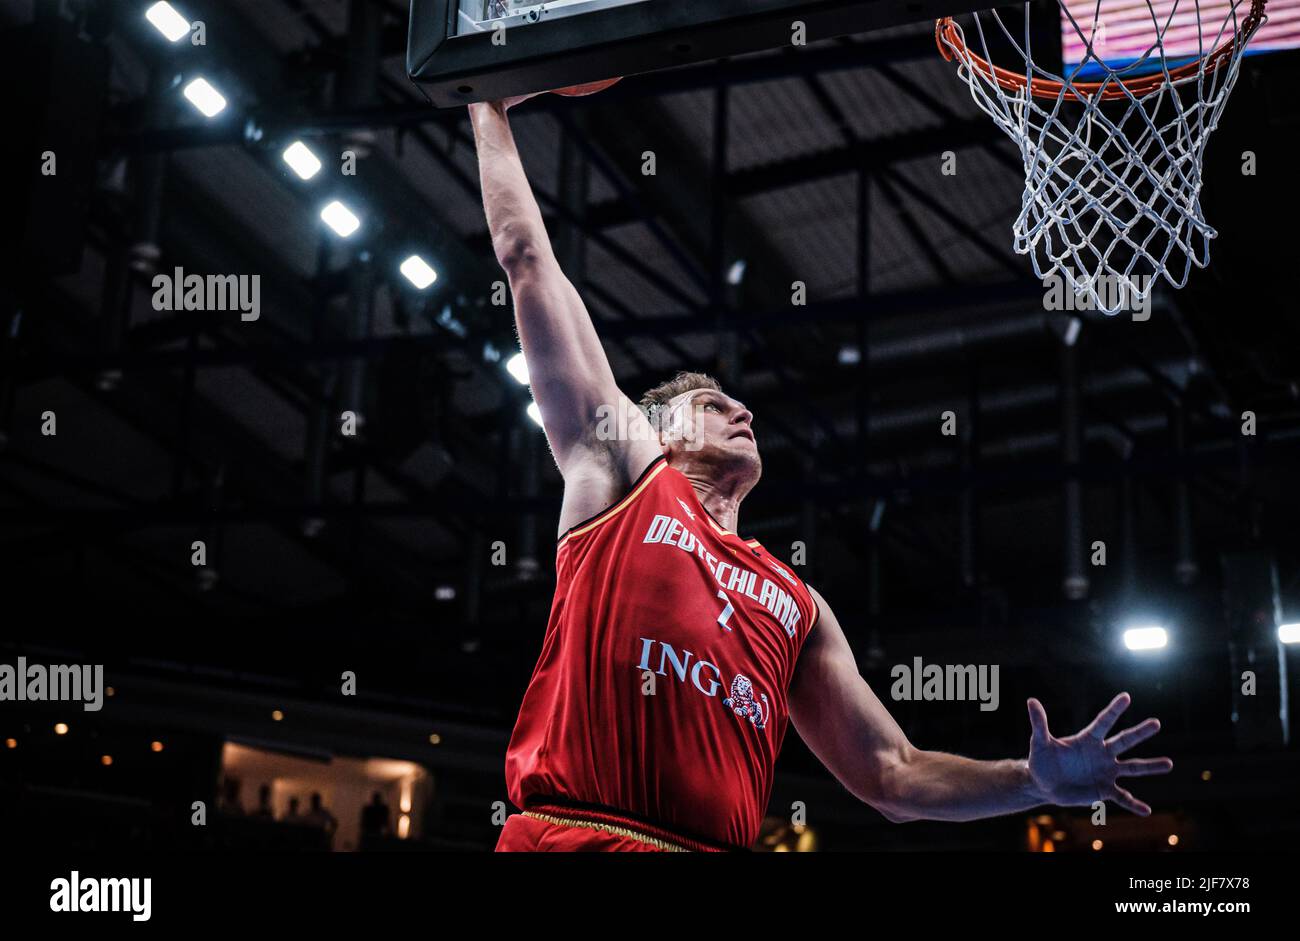 Tallinn, Estonia. 30th June, 2022. Basketball: World Cup Qualification, Estonia - Germany, Europe, 1st round, Group D, Matchday 5. Johannes Voigtmann from Germany in action. Credit: Hendrik Osula/dpa/Alamy Live News Stock Photo